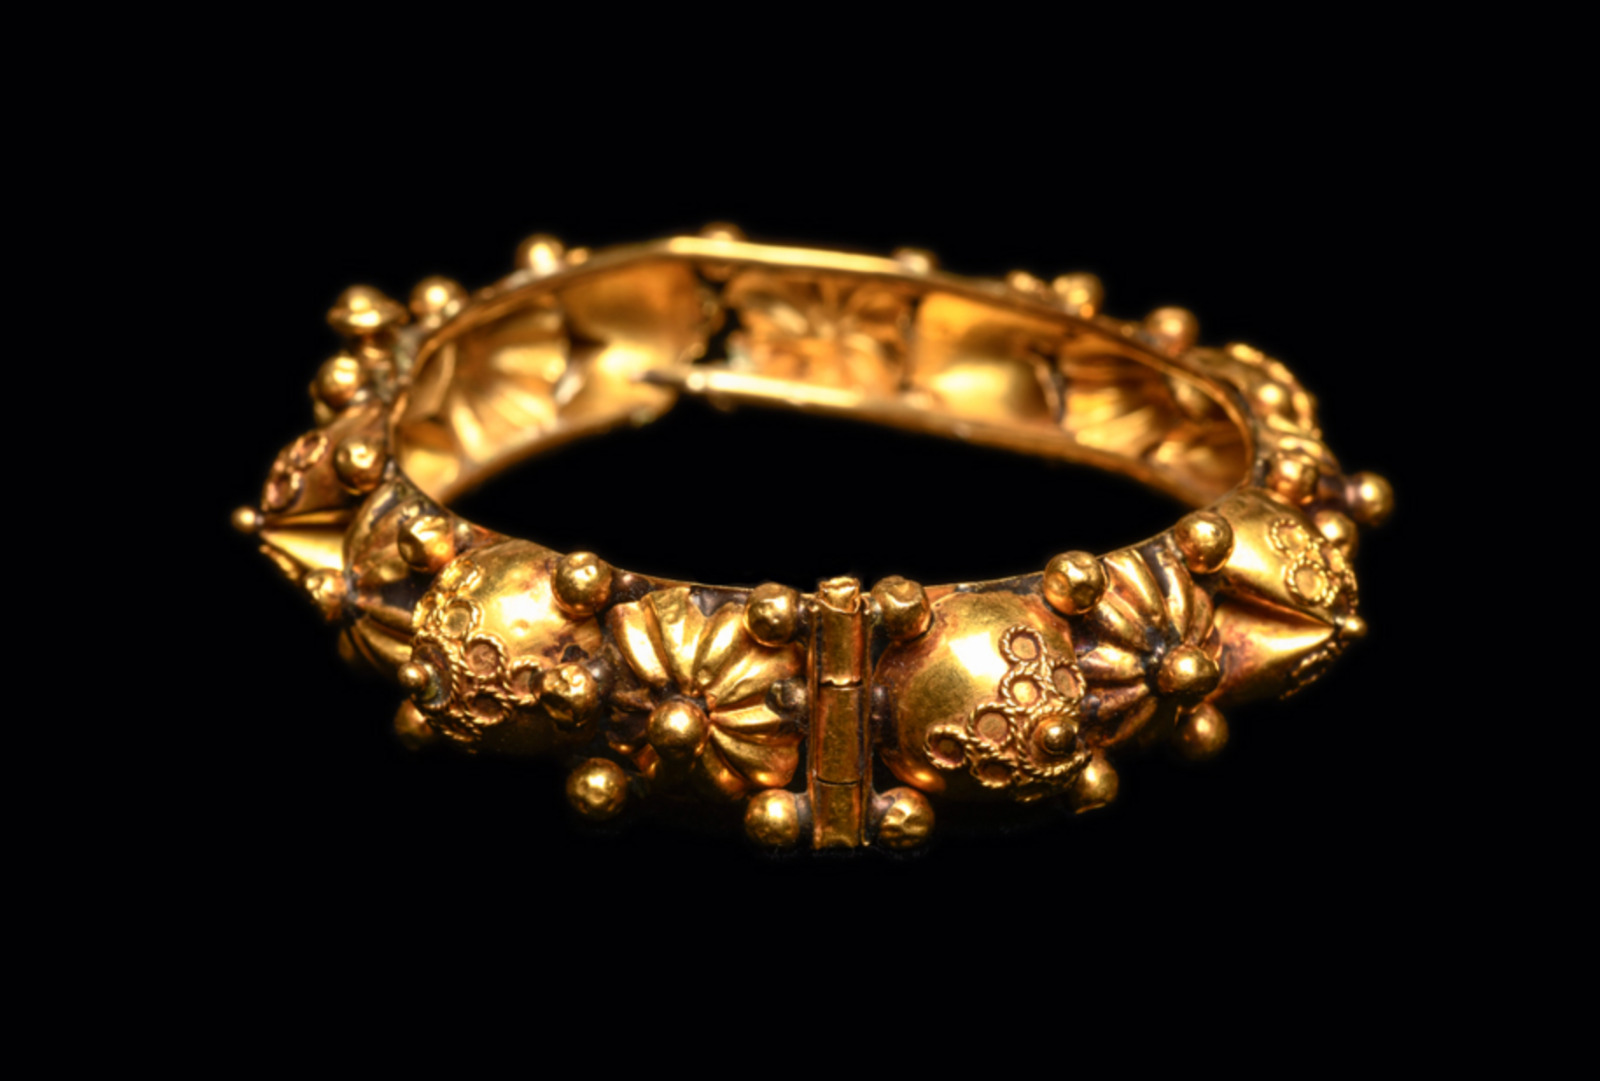 Ancient Byzantine Gold Bracelet Ca. 7th-12th century A.D. Medieval Jewelry 